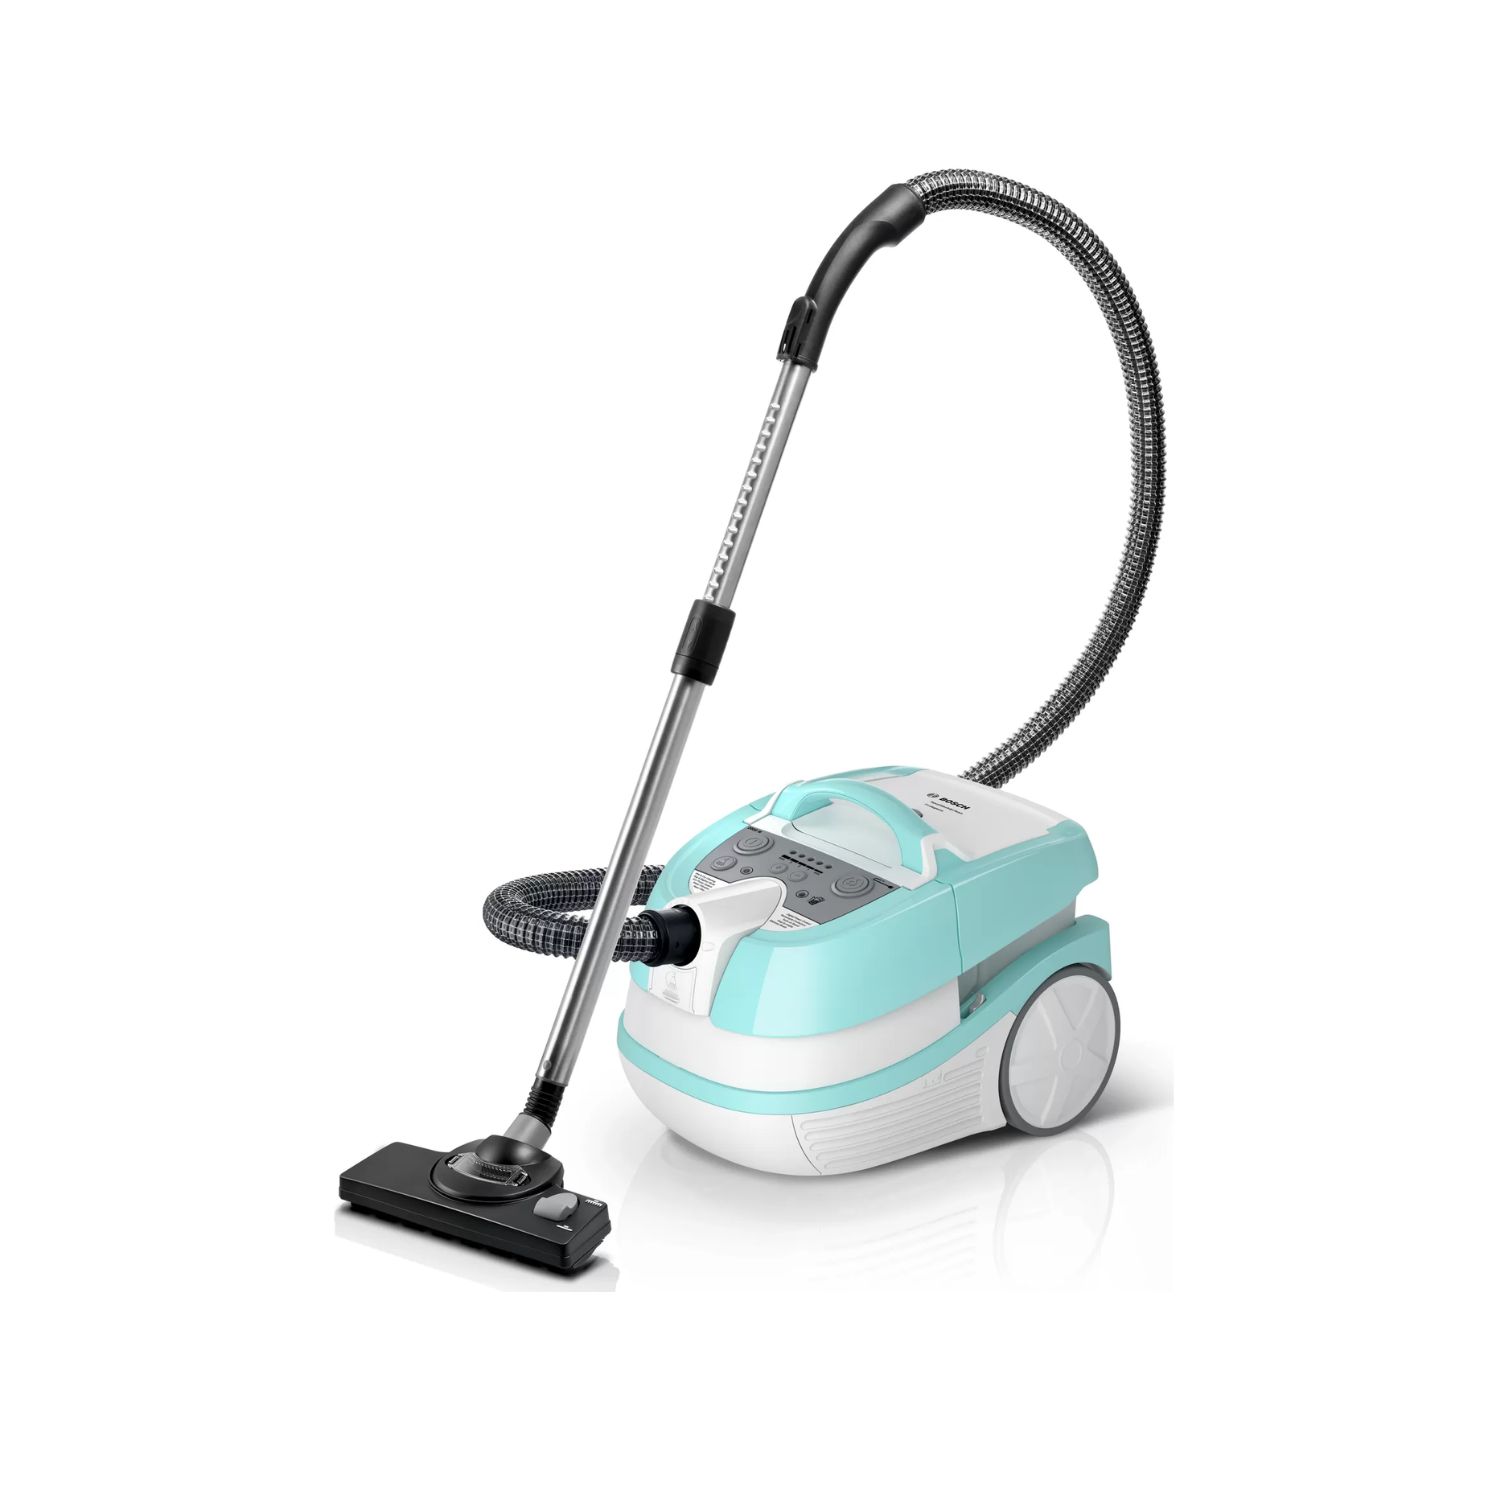 Bosch Wet and Dry Carpet and Upholstery Cleaner